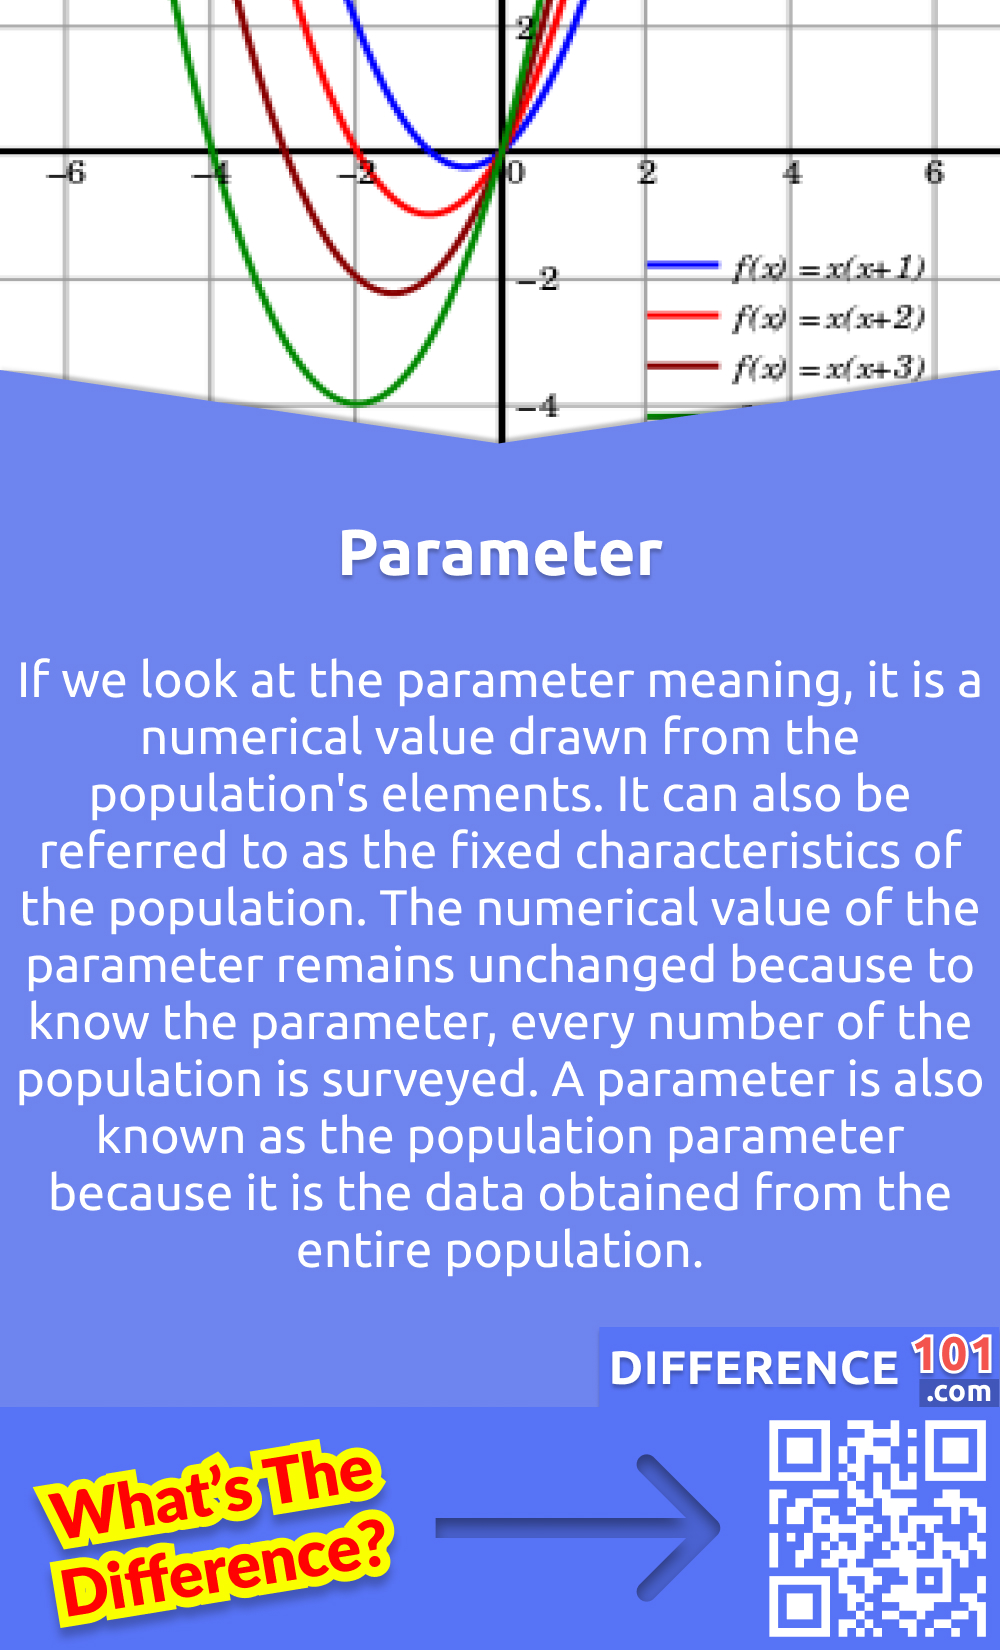 What Is a Parameter? If we look at the parameter meaning, it is a numerical value drawn from the population's elements. It can also be referred to as the fixed characteristics of the population. The numerical value of the parameter remains unchanged because to know the parameter, every number of the population is surveyed. A parameter is also known as the population parameter because it is the data obtained from the entire population. In statistics, a parameter may not be possible for every research, but for some, they are possible, for example, If there is a database for the number of registered votes in a state. Data collected from the database can be used to ask questions and calculate the parameters of the entire population of registered voters.
